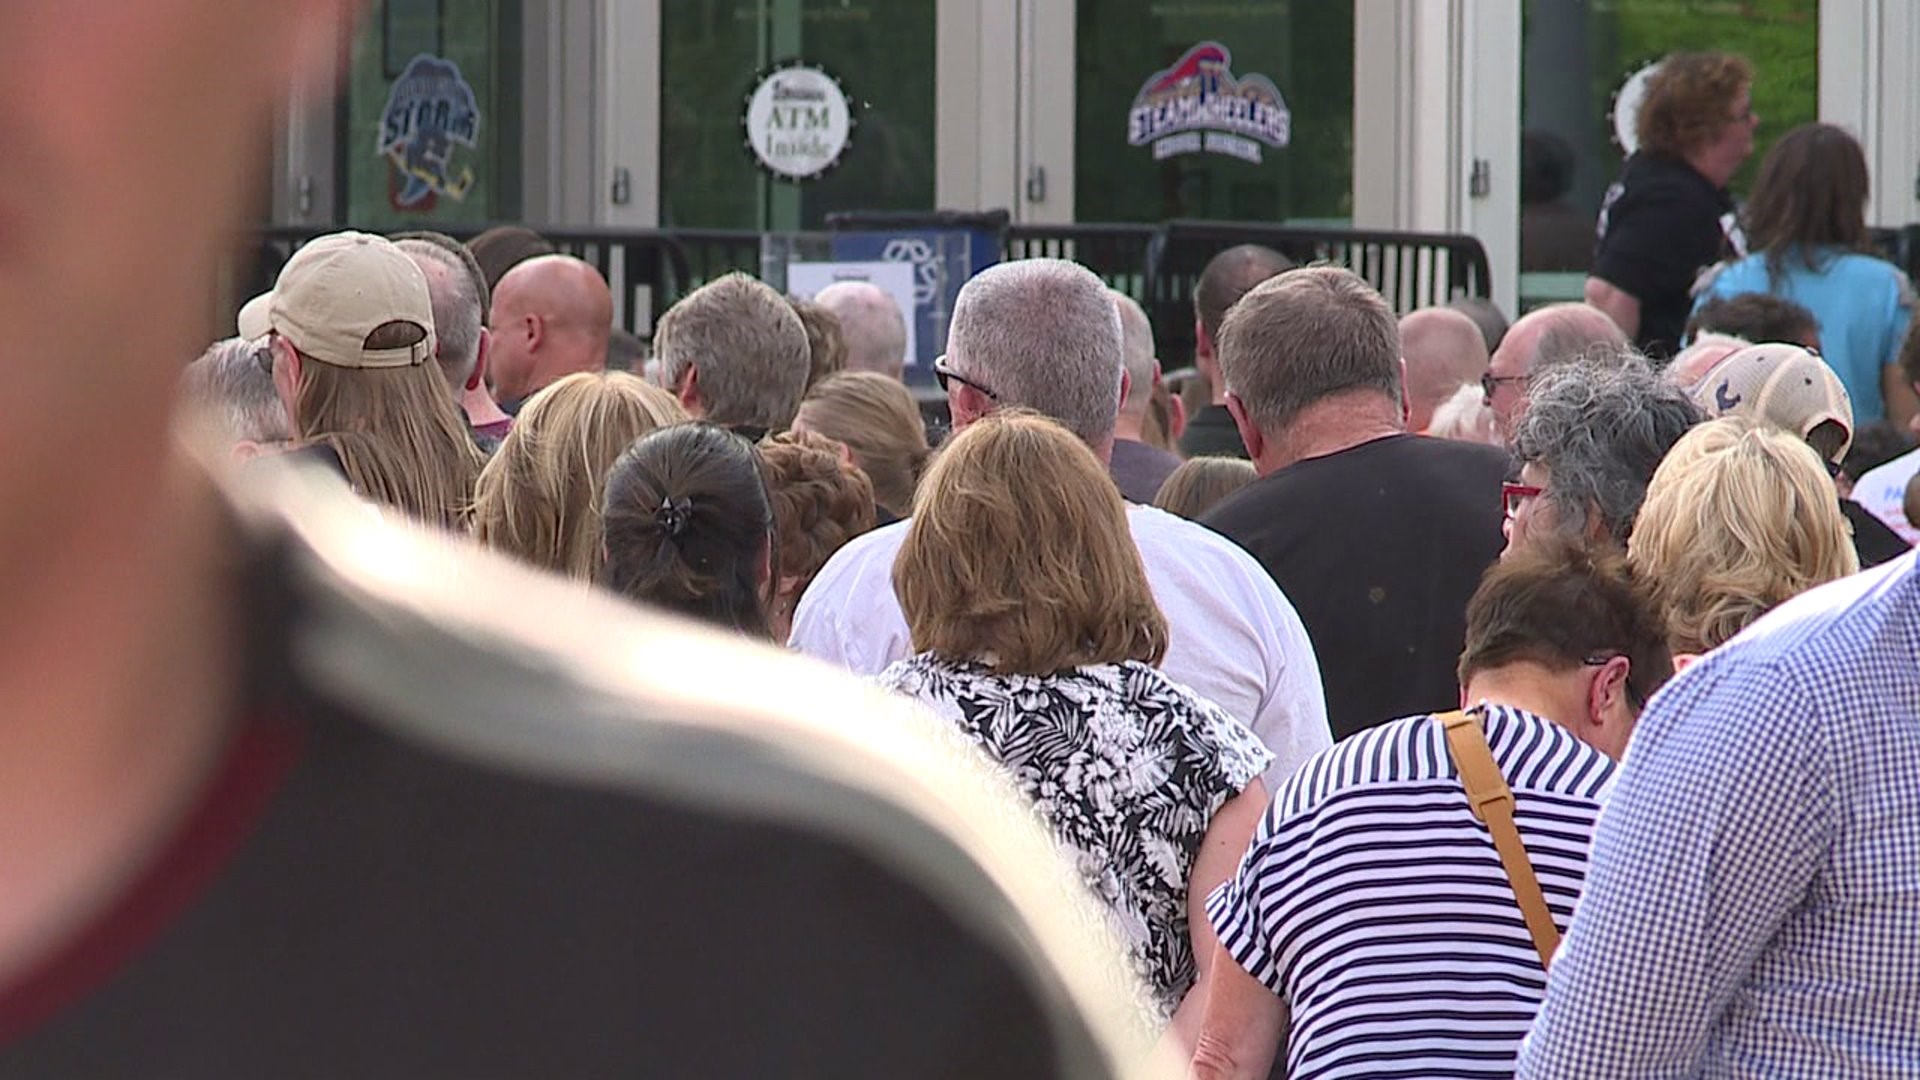 Local small businesses feel impact of Paul McCartney concert